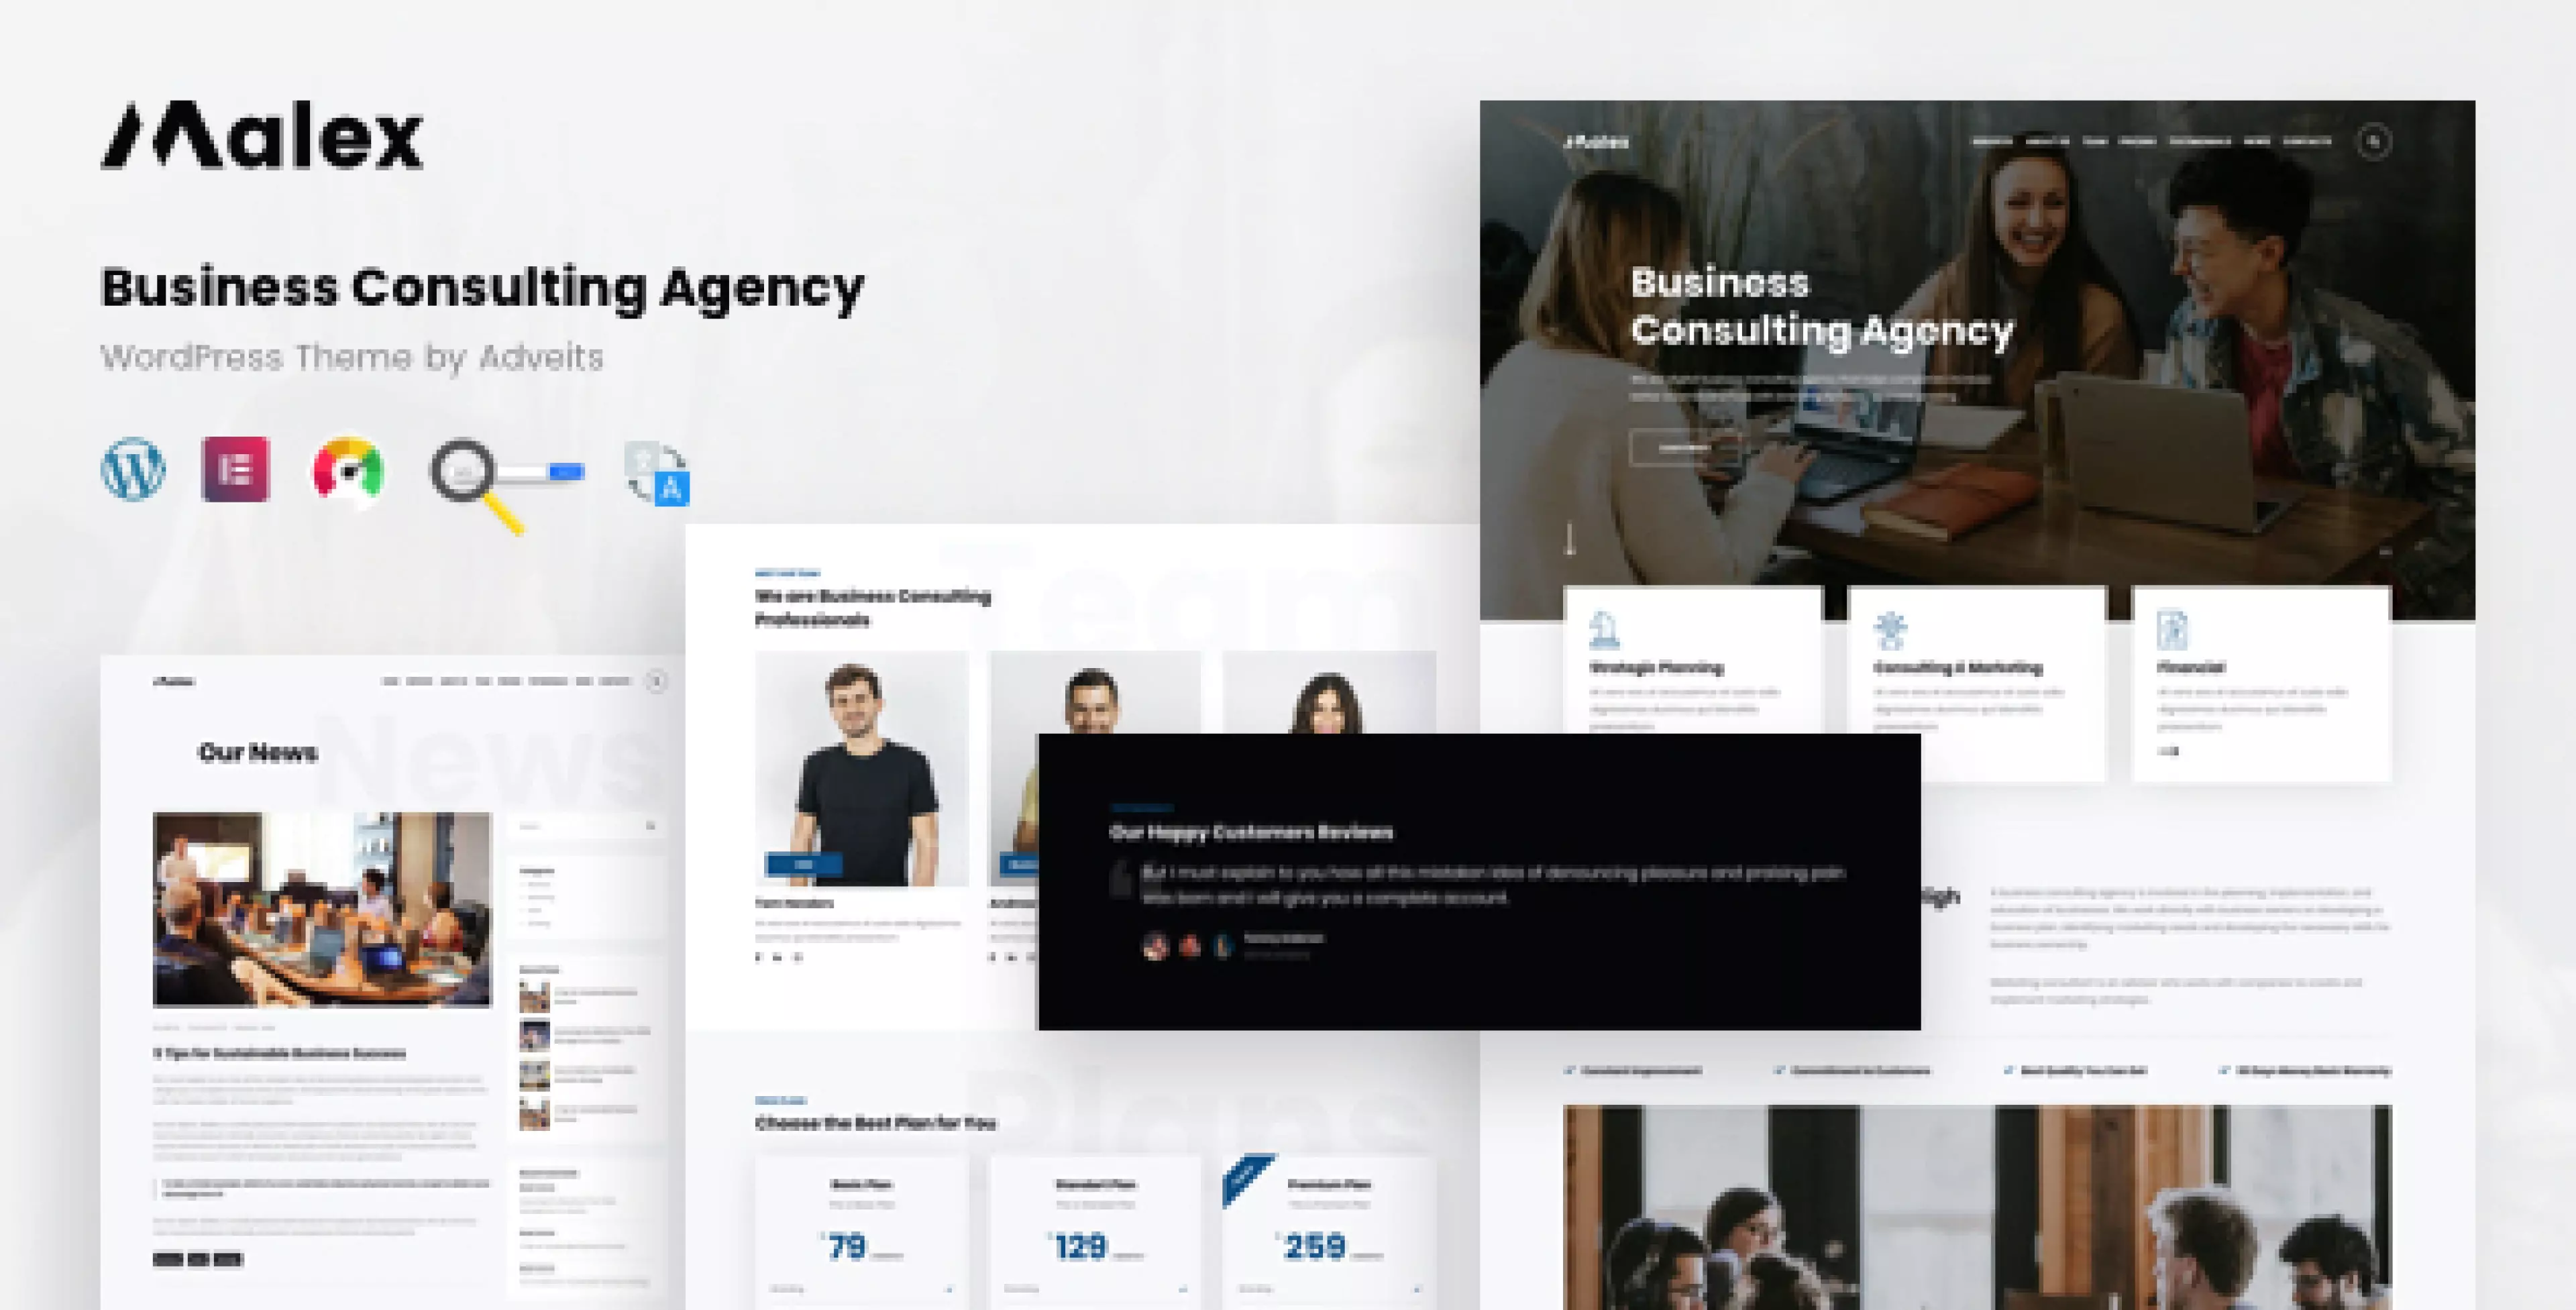 Malex - Business Consulting Agency WordPress Theme 1.12.0